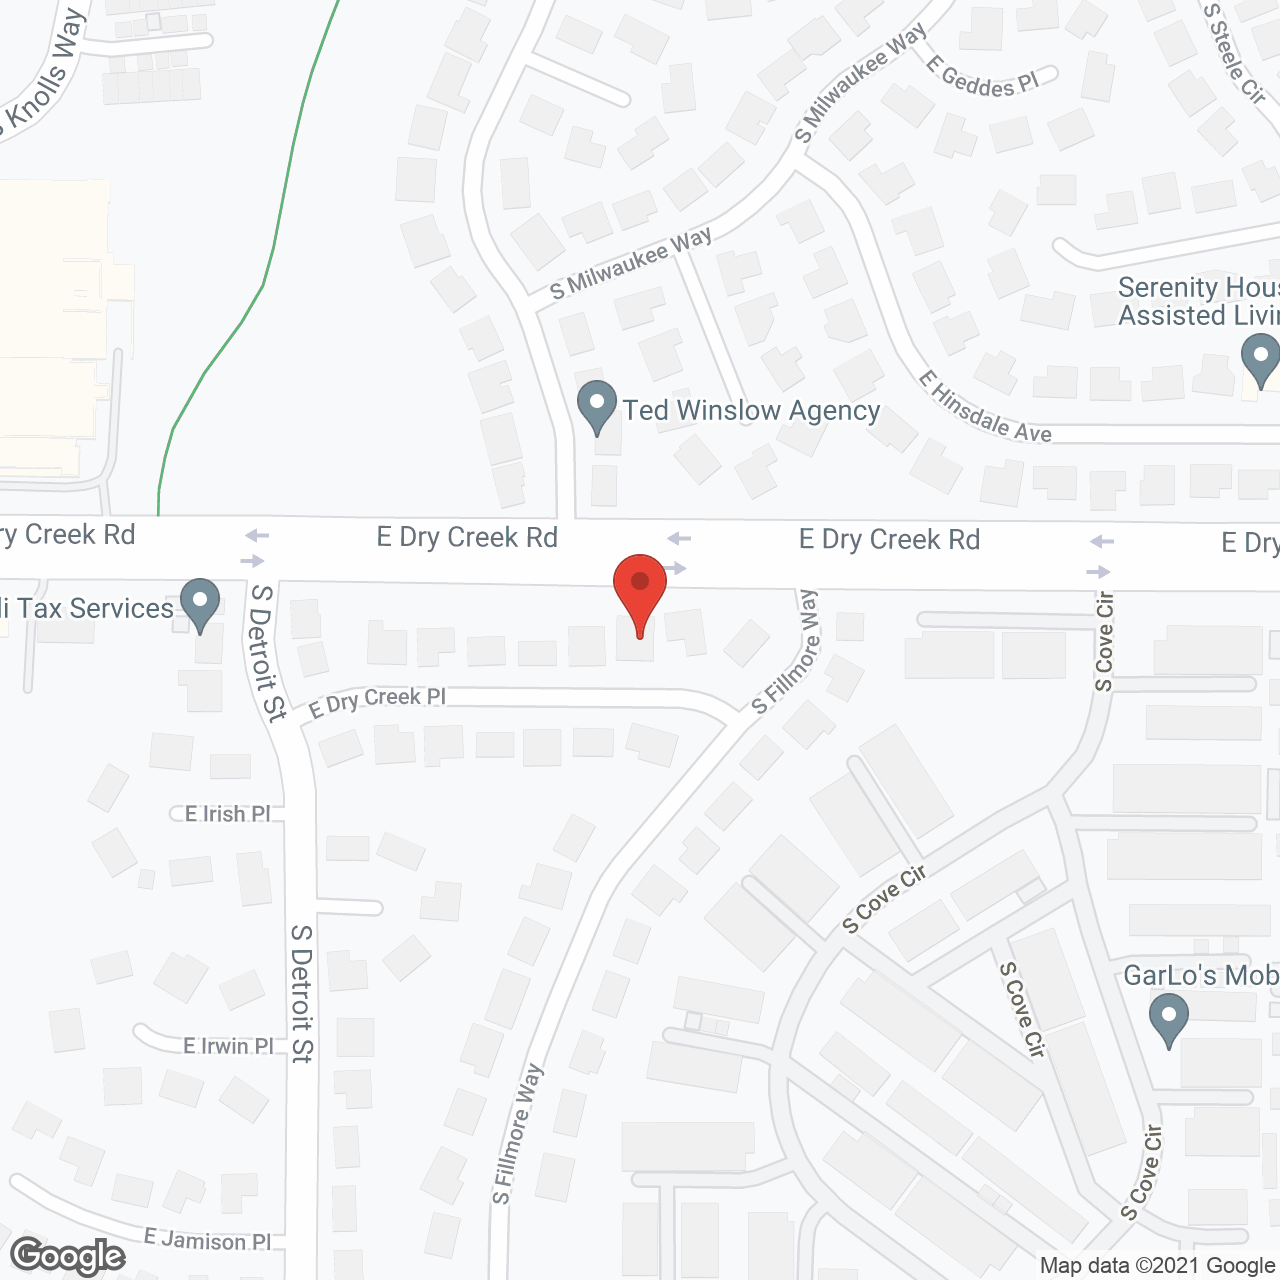 Serenity House Assisted Living Centennial in google map